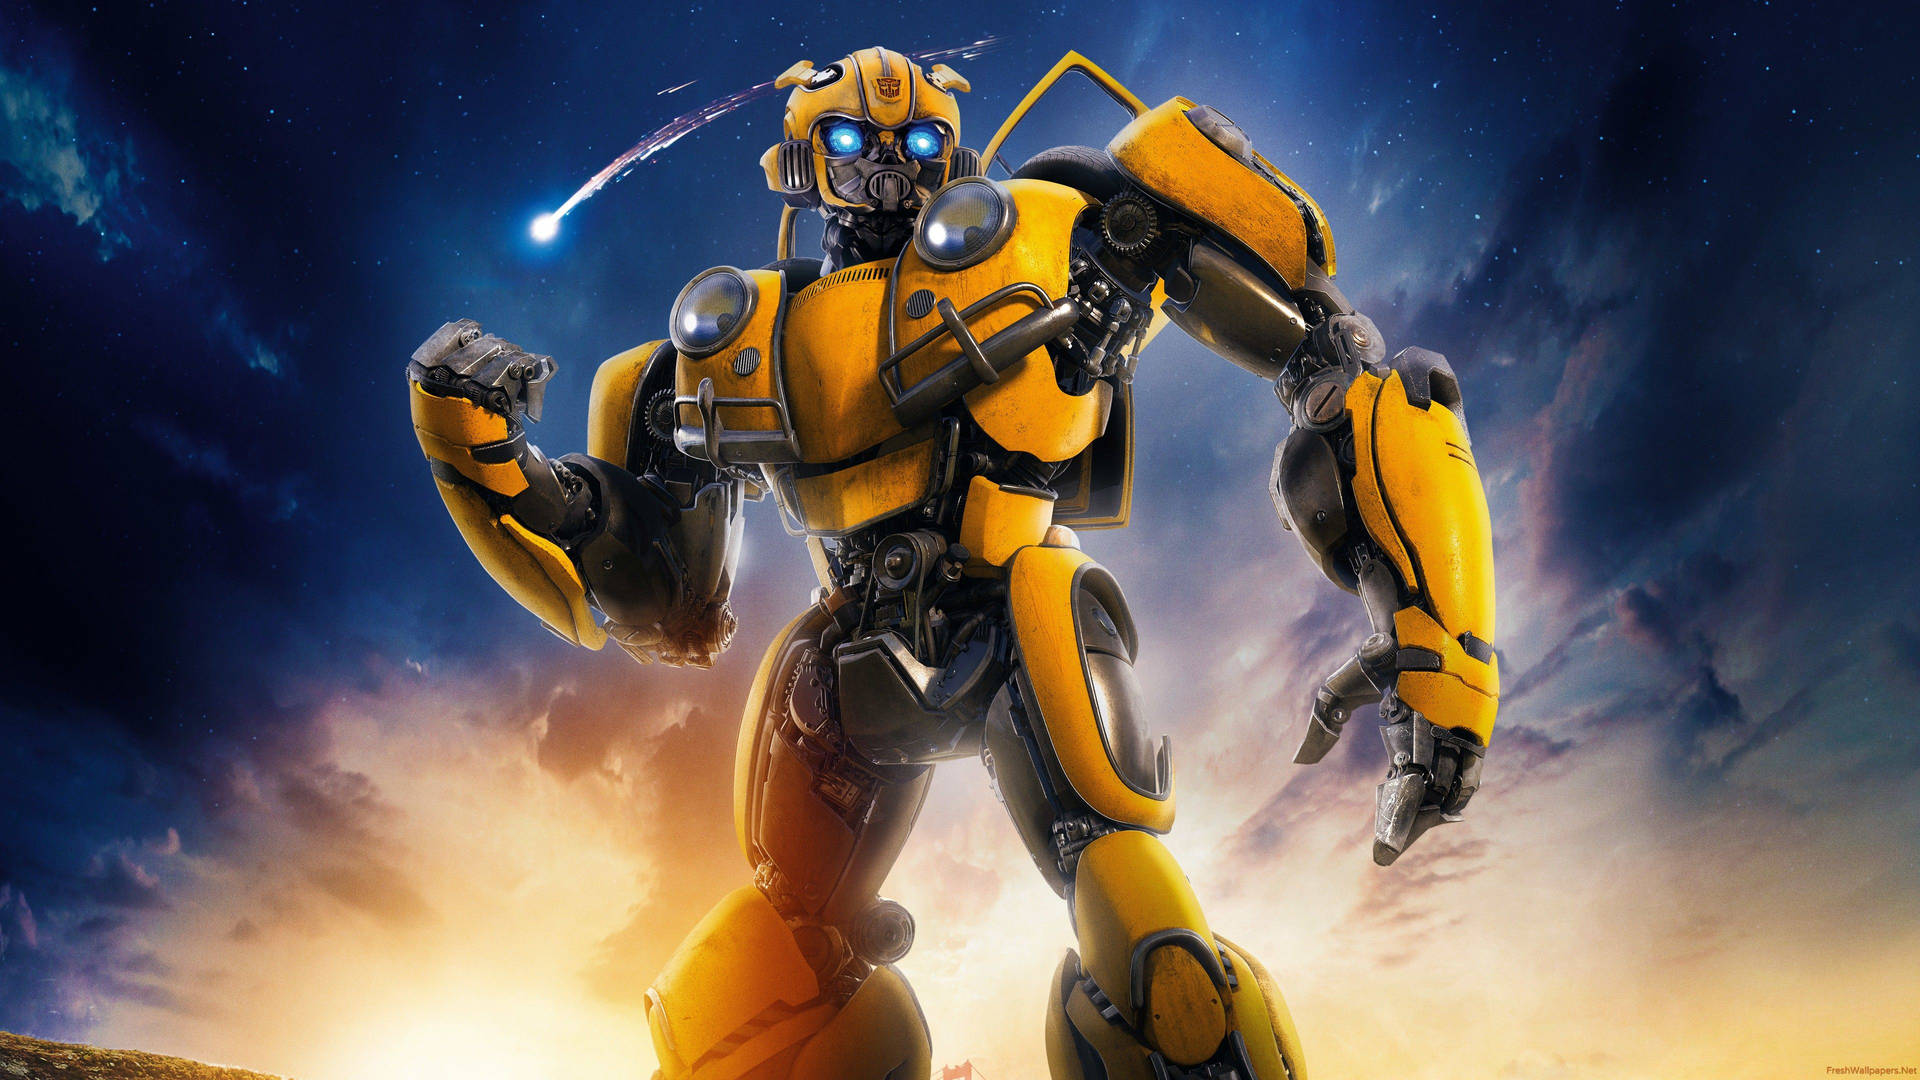 Bumble Bee Transformers Hollywood Movie Wallpaper